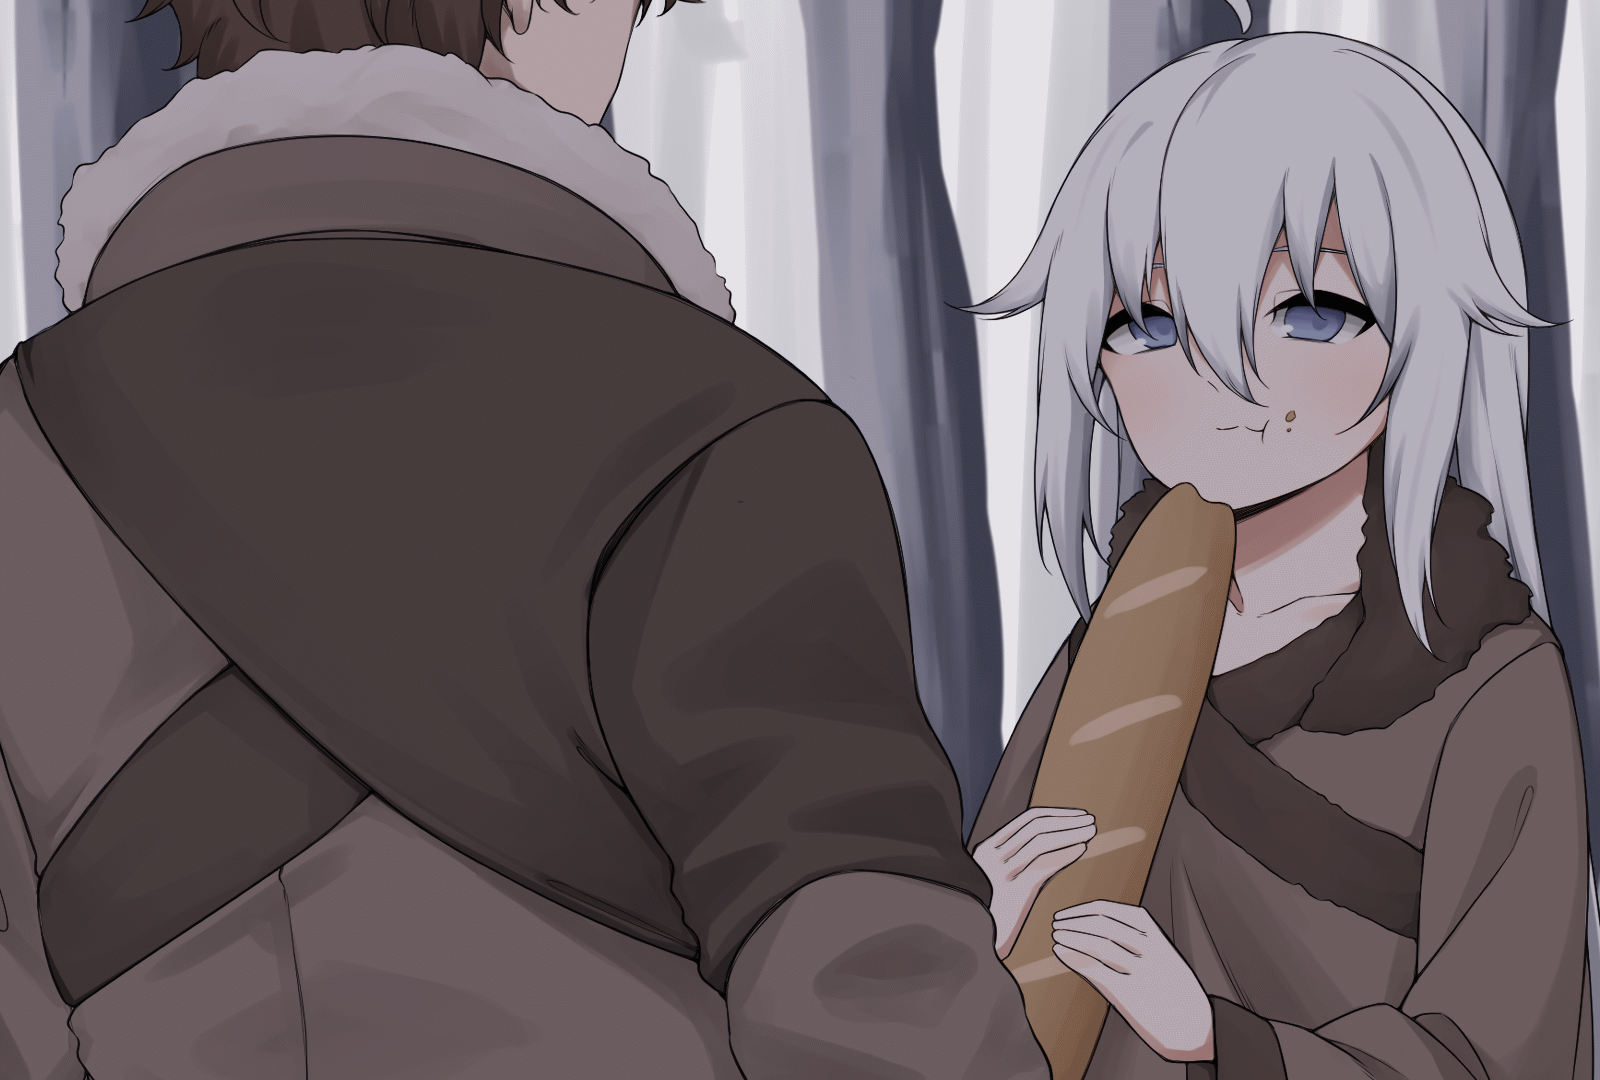 __jefuty_and_mendo_codename_bakery_girl_and_1_more_drawn_by_act_xadachit__16e34764801f6e9d280324ffc92056ba.gif